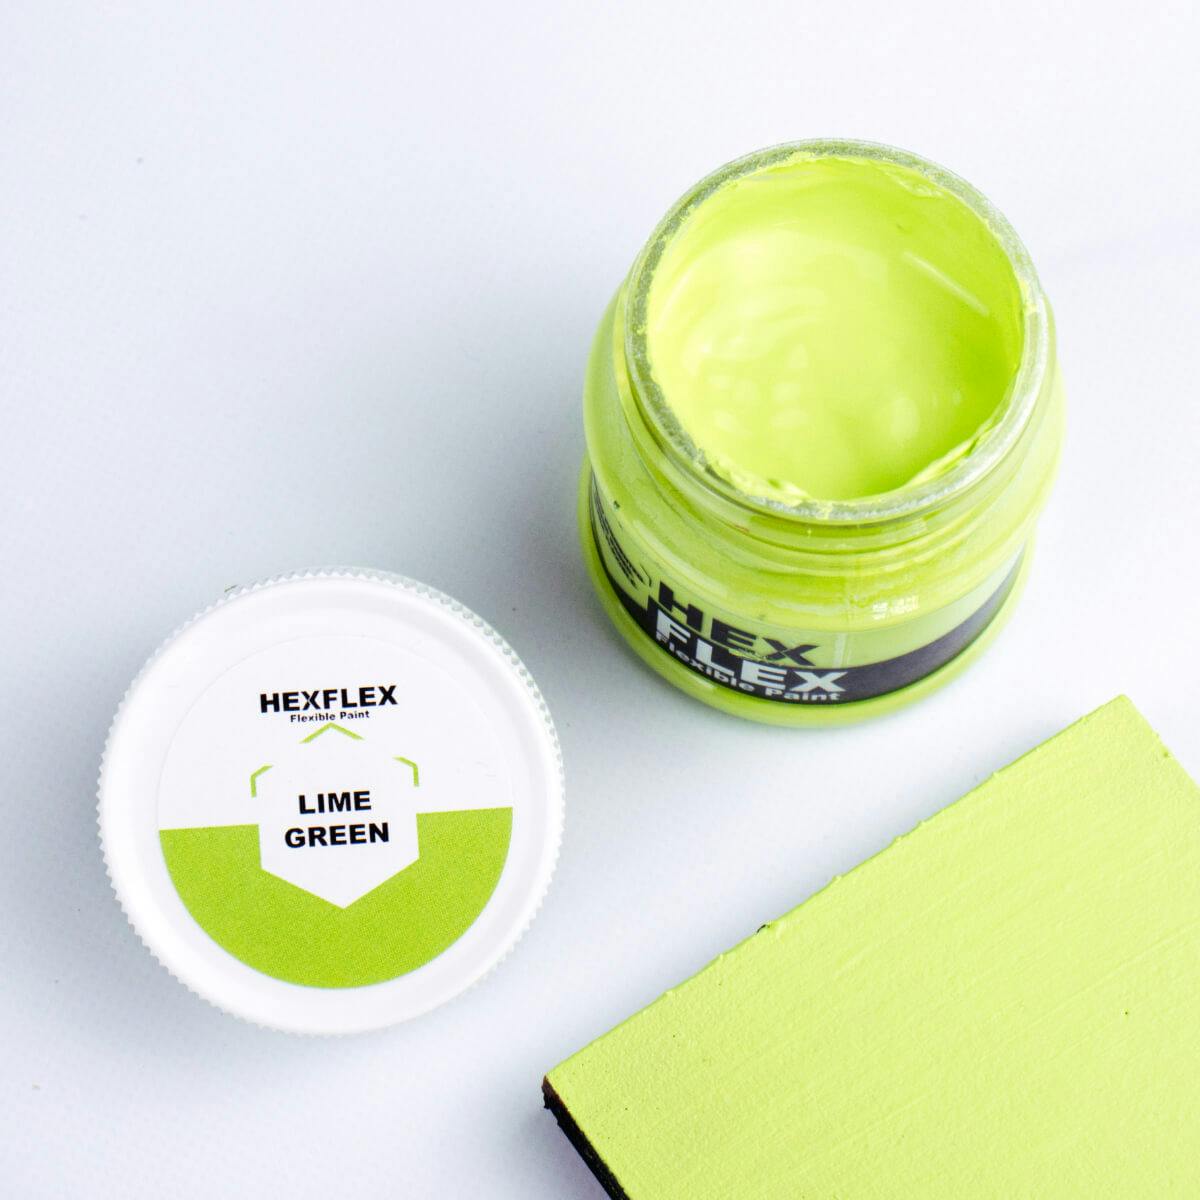 The bottle, cap and lime green HexFlex colour sample